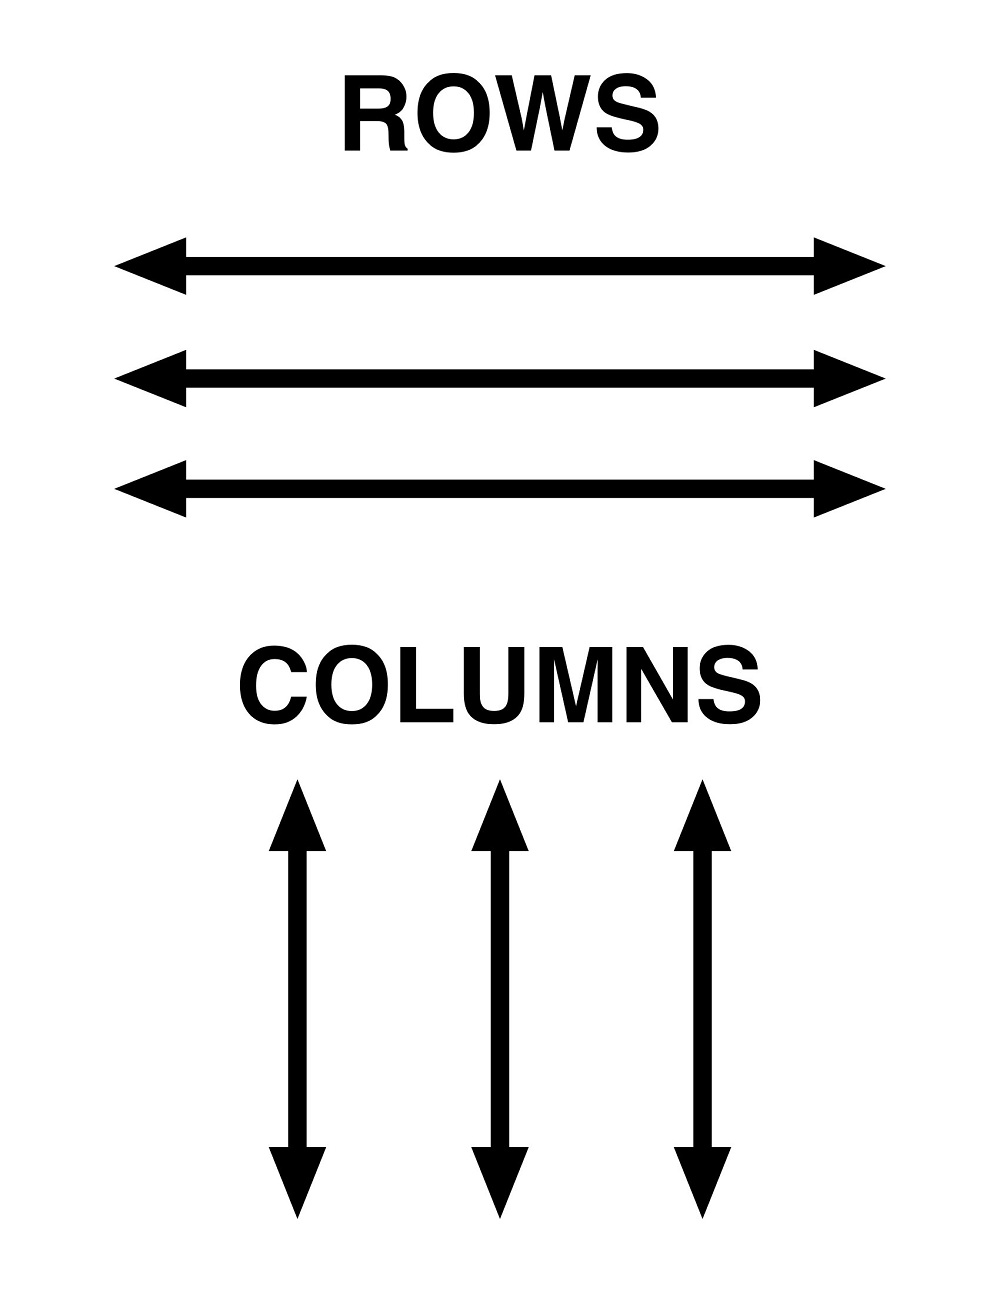 Rows and Columns Reminder